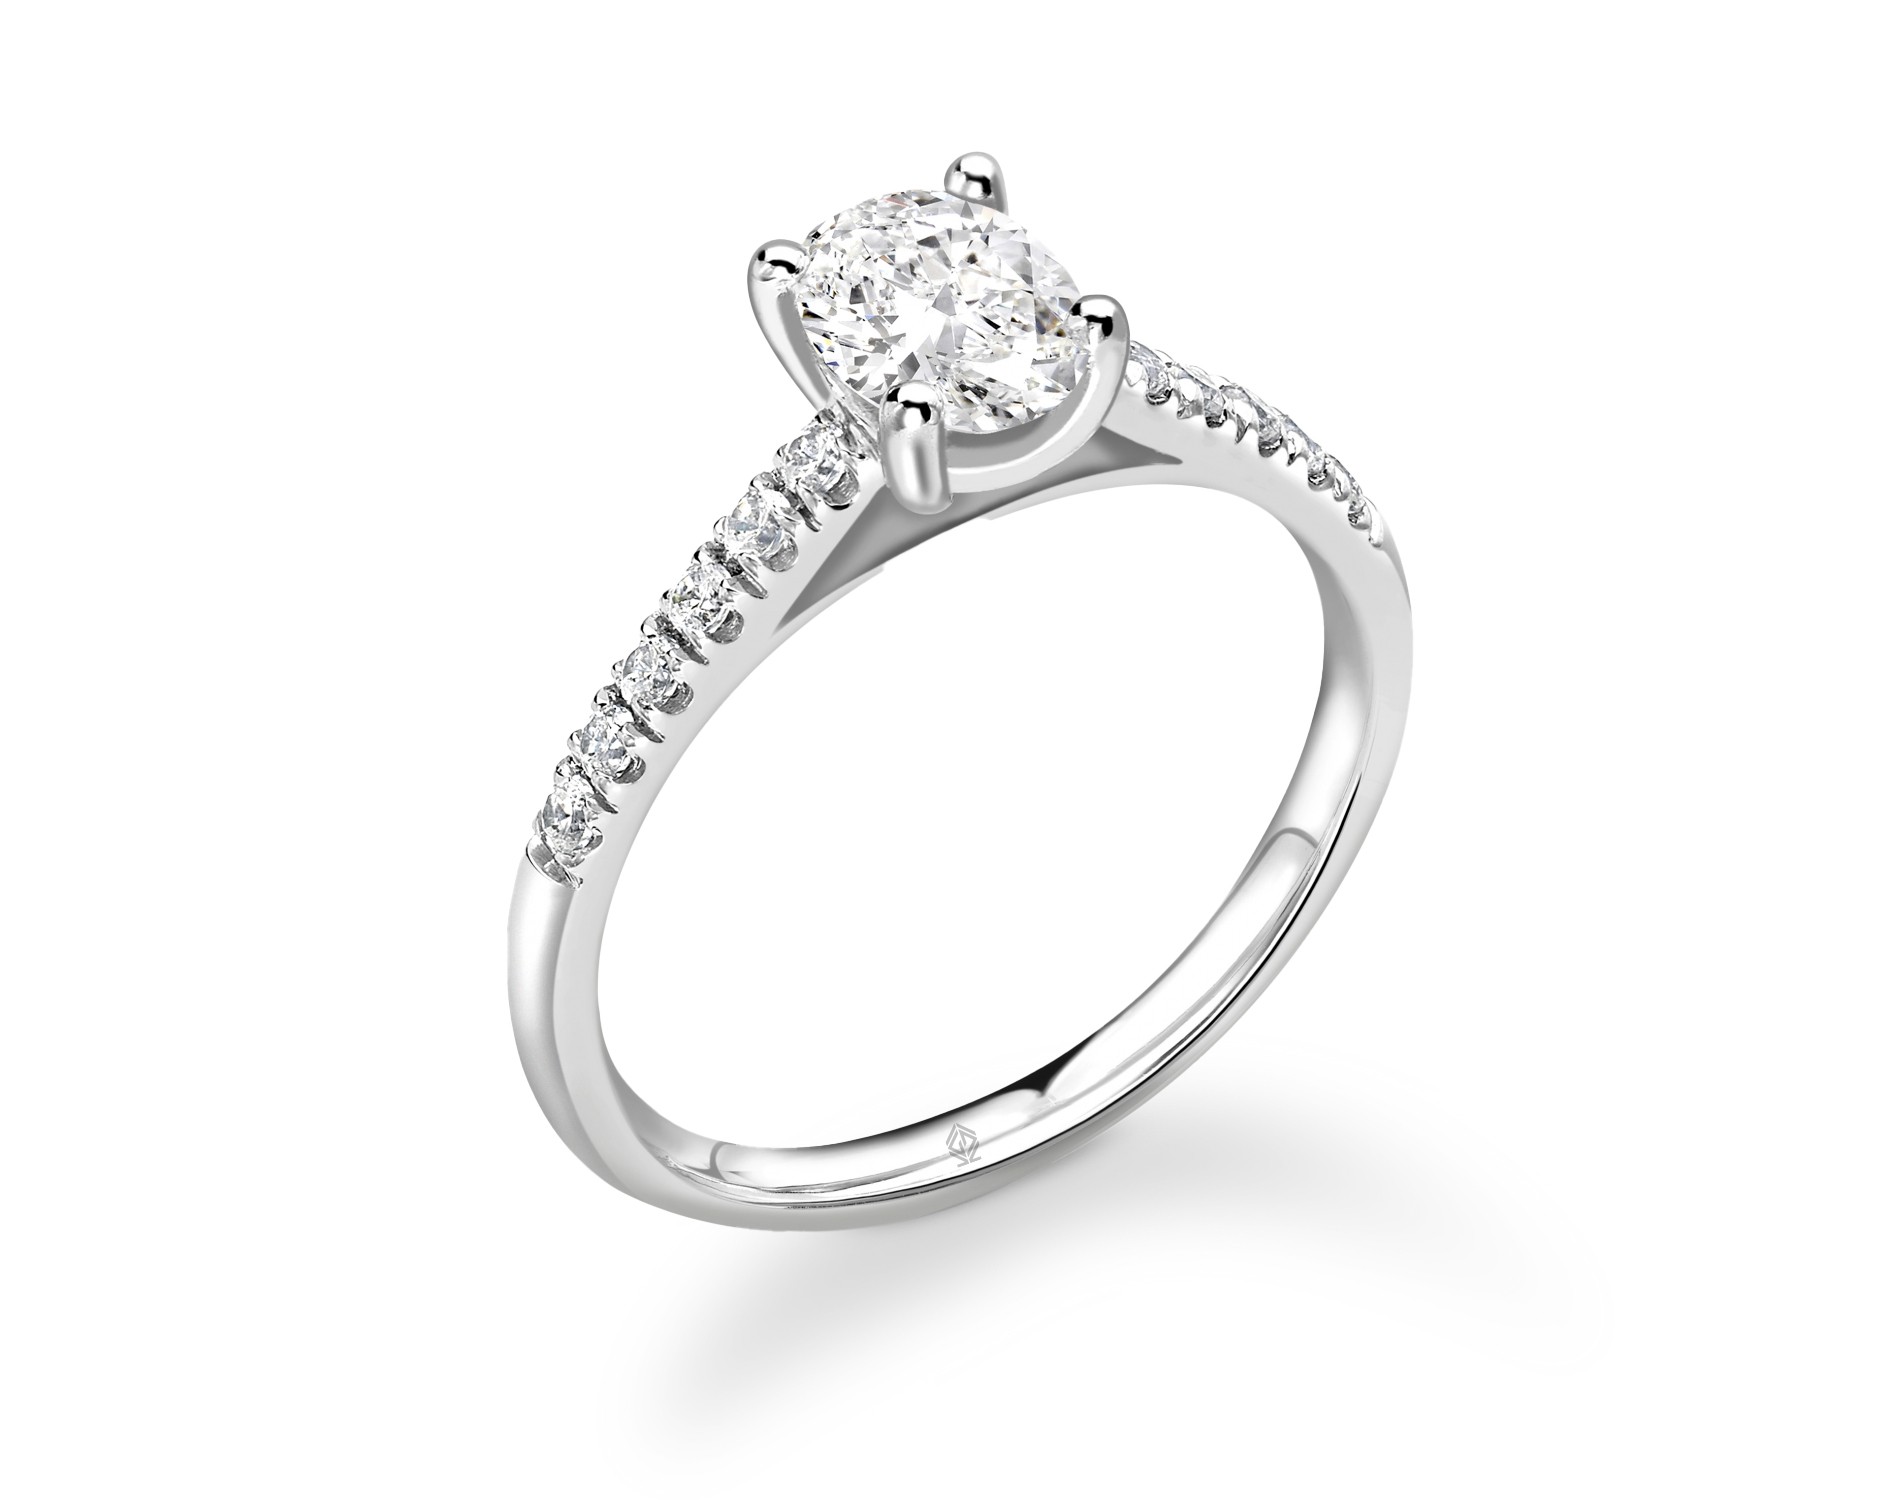 18K WHITE GOLD 4 PRONGS OVAL CUT DIAMOND ENGAGEMENT WITH SIDE STONES PAVE SET